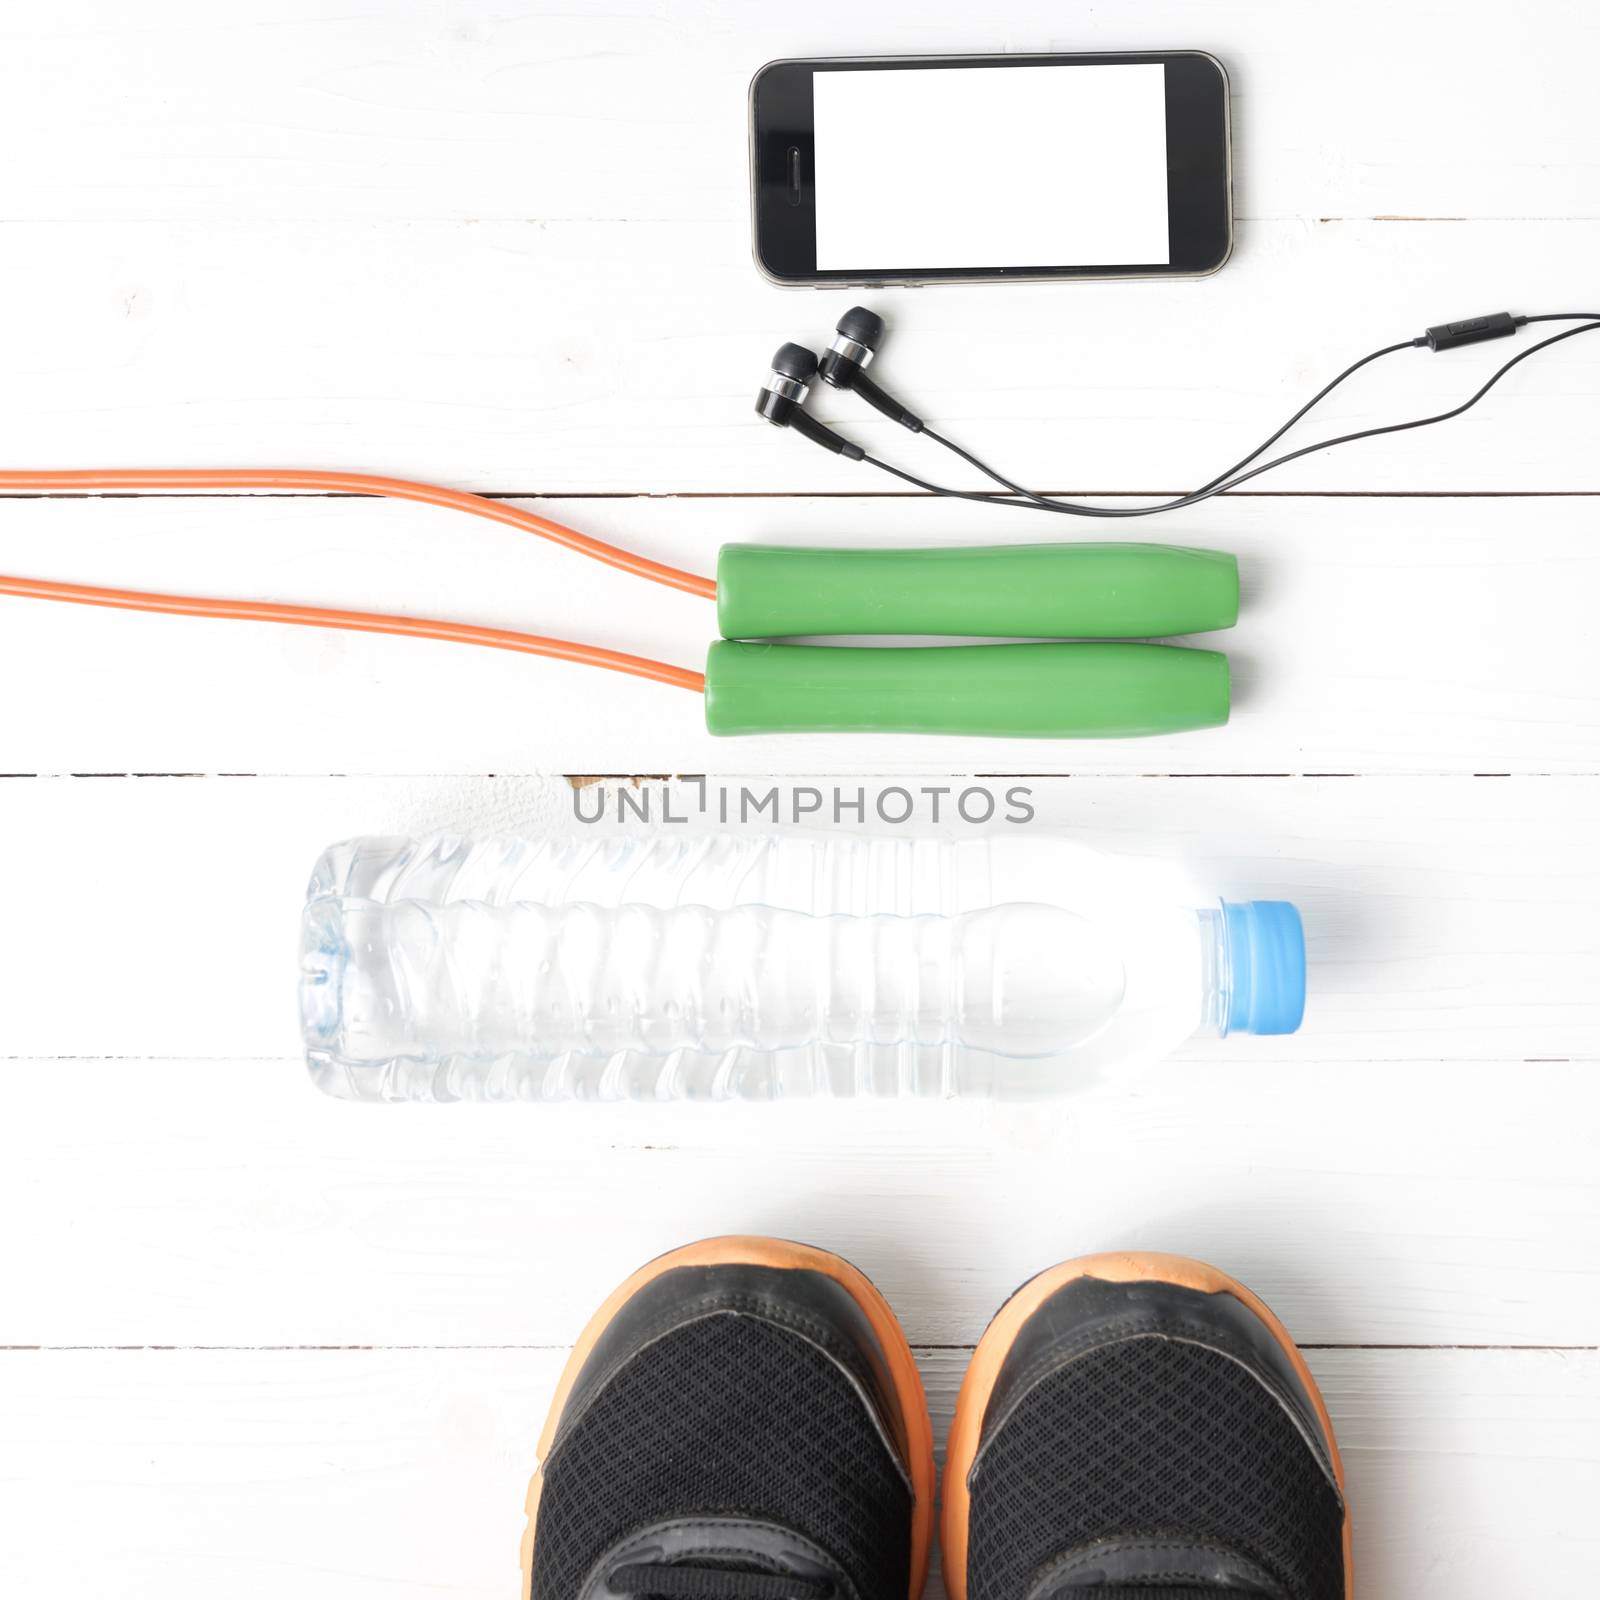 fitness equipment : running shoes,jumping rope,water bottle and phone on white wood table